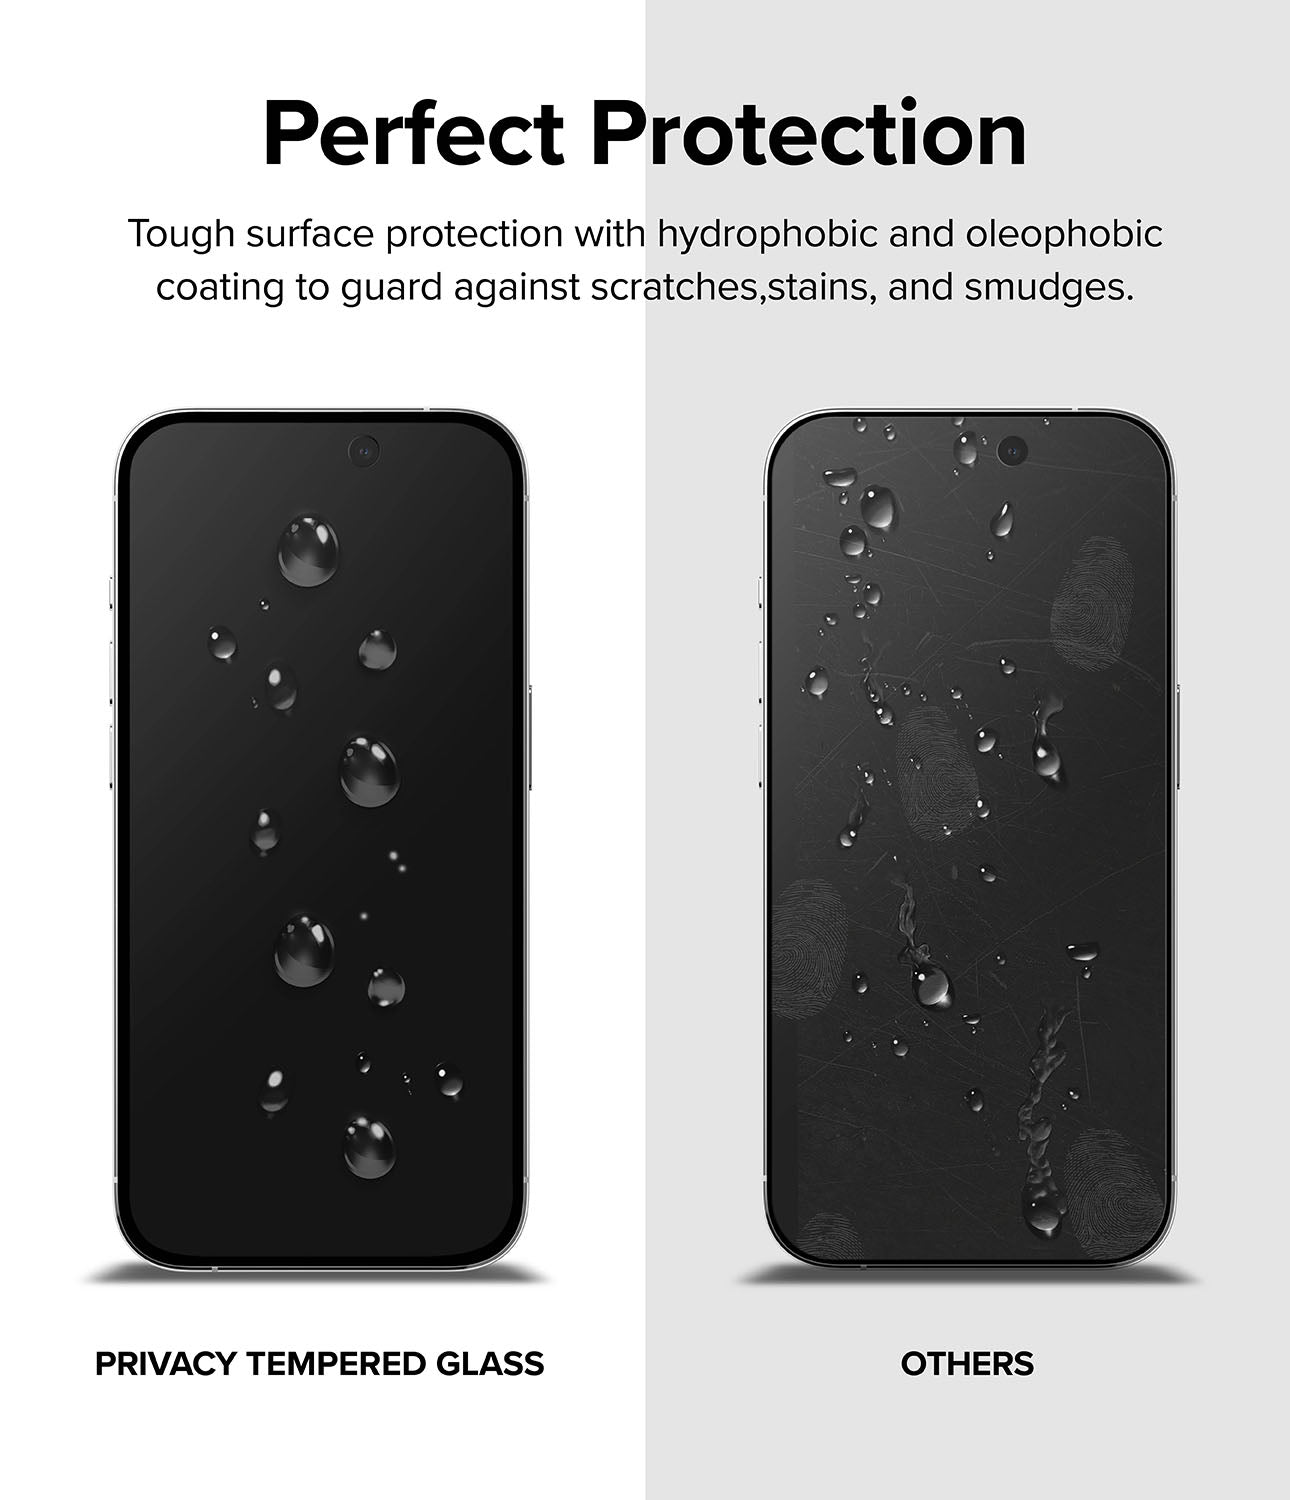 iPhone 15 Pro Max Screen Protector | Privacy Glass - Perfect Protection. Touch surface protection with hydrophobic and oleophobic coating to guard against scratches, stains, and smudges.